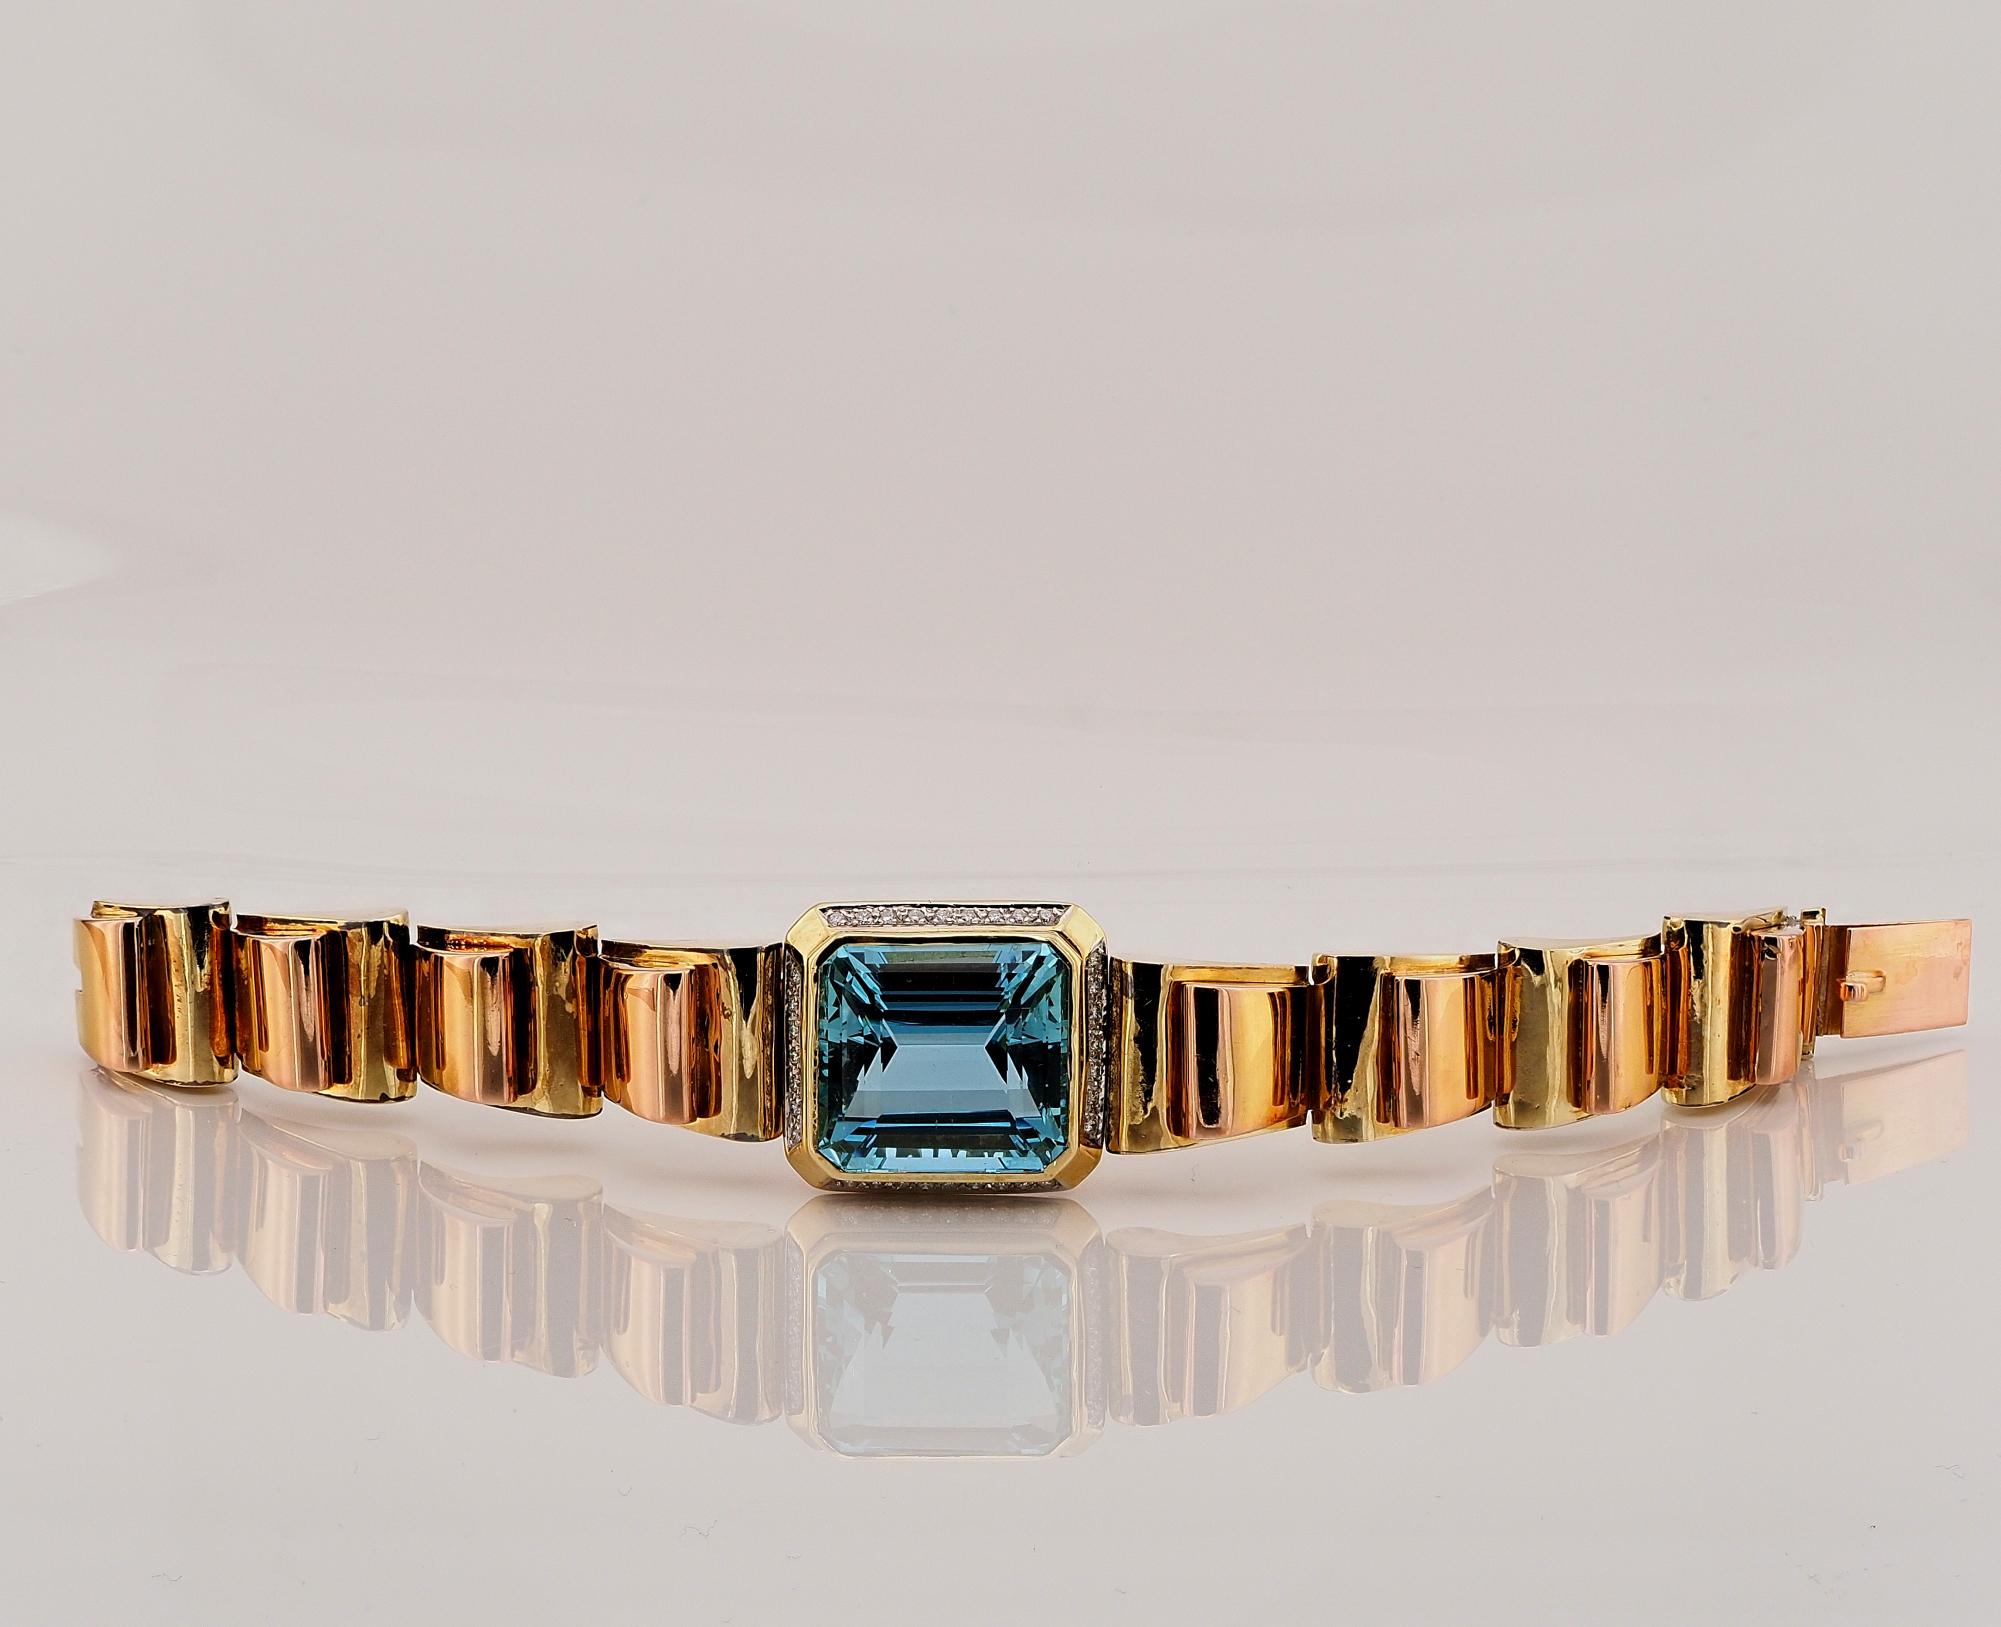 Big & Bold
Chic and so unique, this bold original late Deco/Retro bracelet, is glamorous and lavish, unique created
Hand crafted of solid 18 KT gold, rose and yellow, combined colours of gold, for the rare hand made articulated tank bracelet,